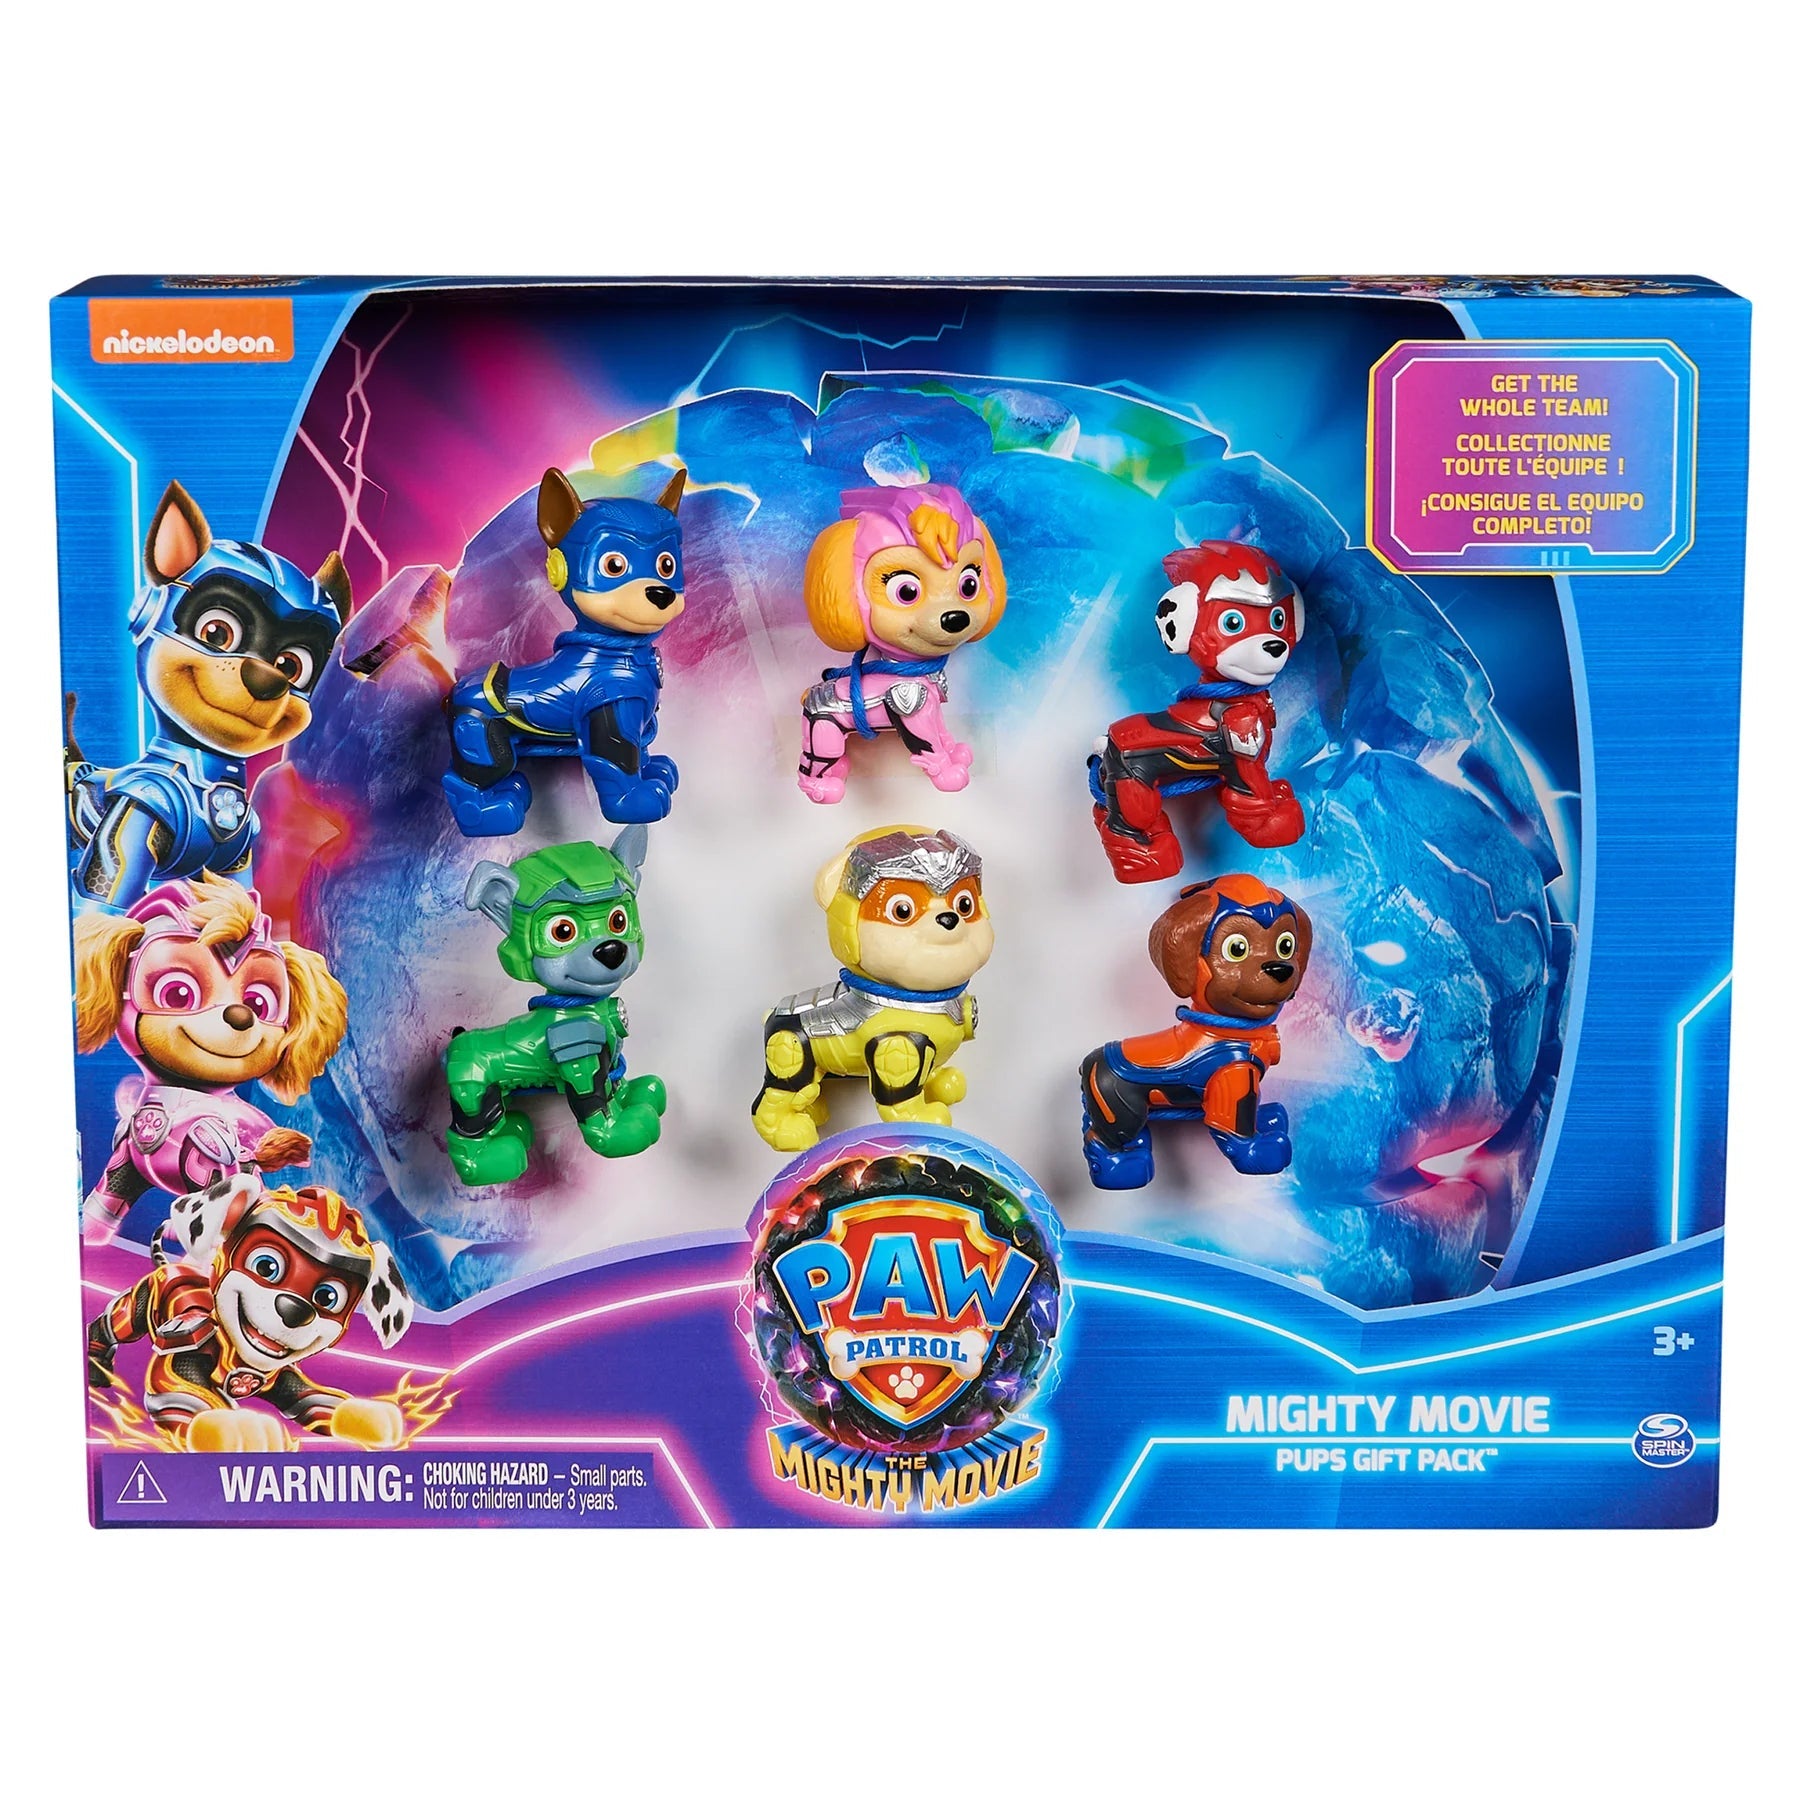 Paw Patrol The Mighty Movie, Toy Figures Gift Pack